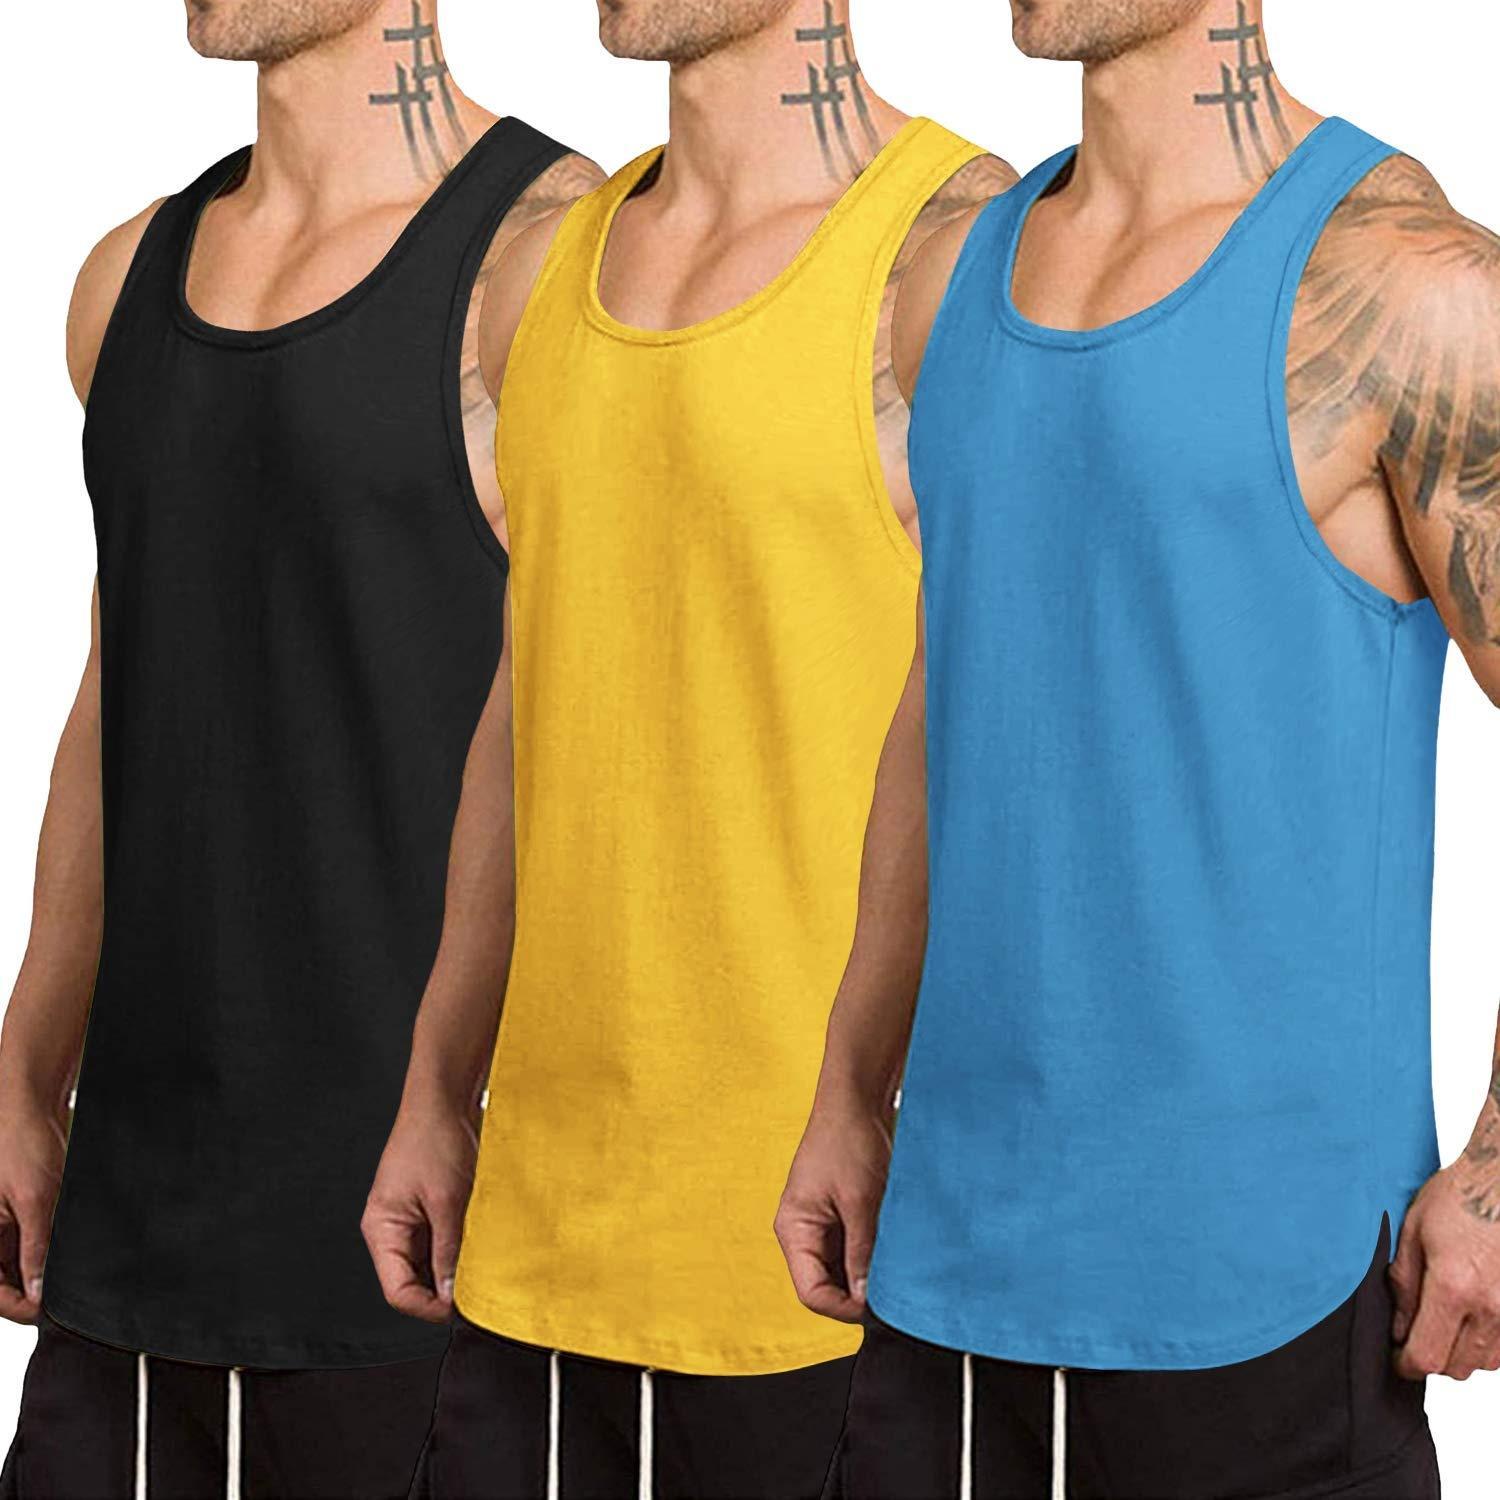 

Men's 3 Pack Quick Dry Workout Tank Top Gym Muscle Tee Fitness Bodybuilding Sleeveless T Shirt